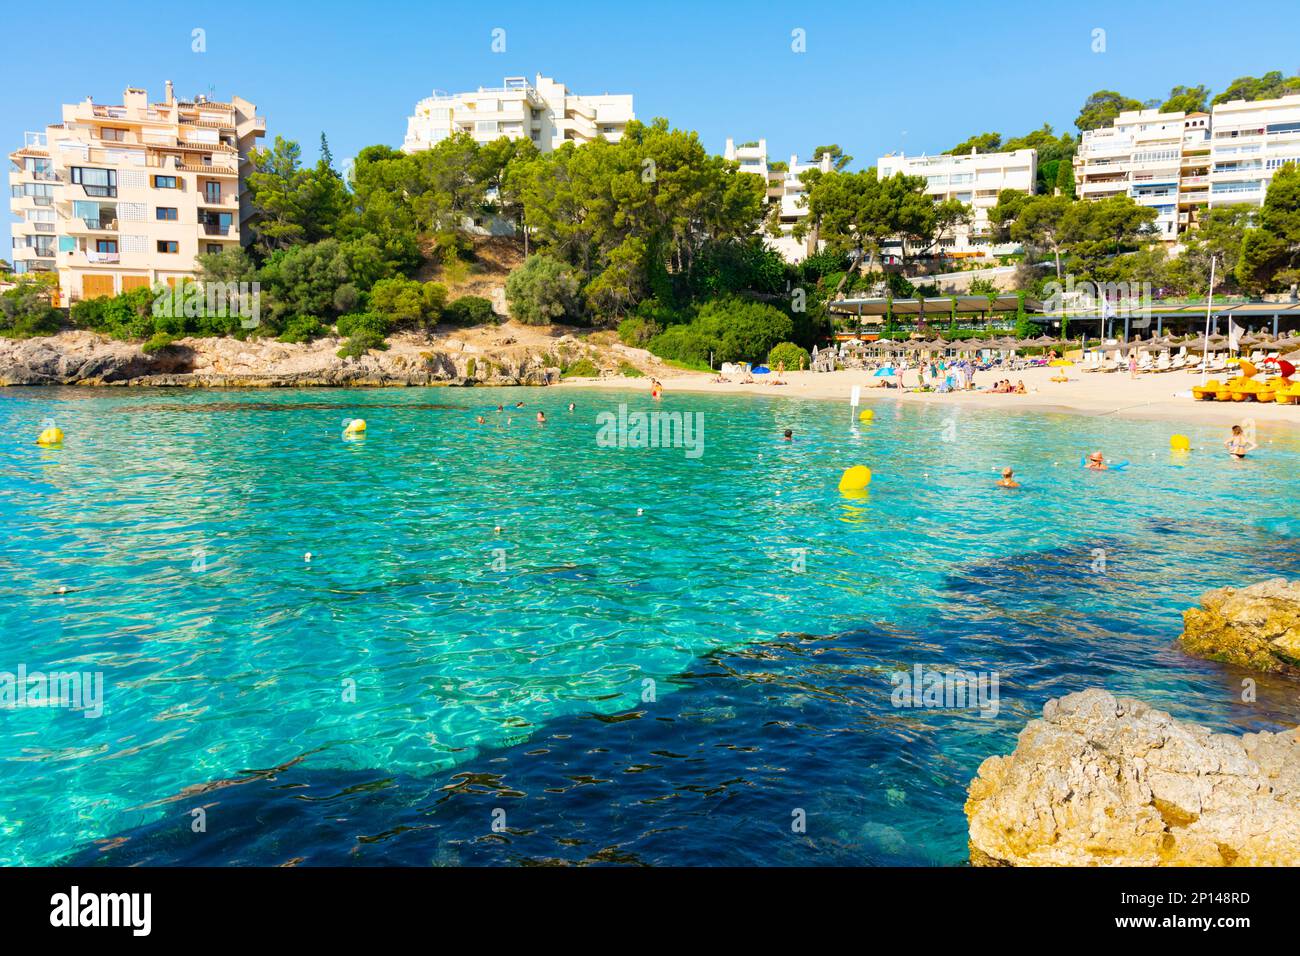 Ses Illetes, Majorca, Balearic islands, Spain. July 20th, 2022 - Terrace of the restaurant of the Balneario Illetas spa next to the beach, with umbrel Stock Photo